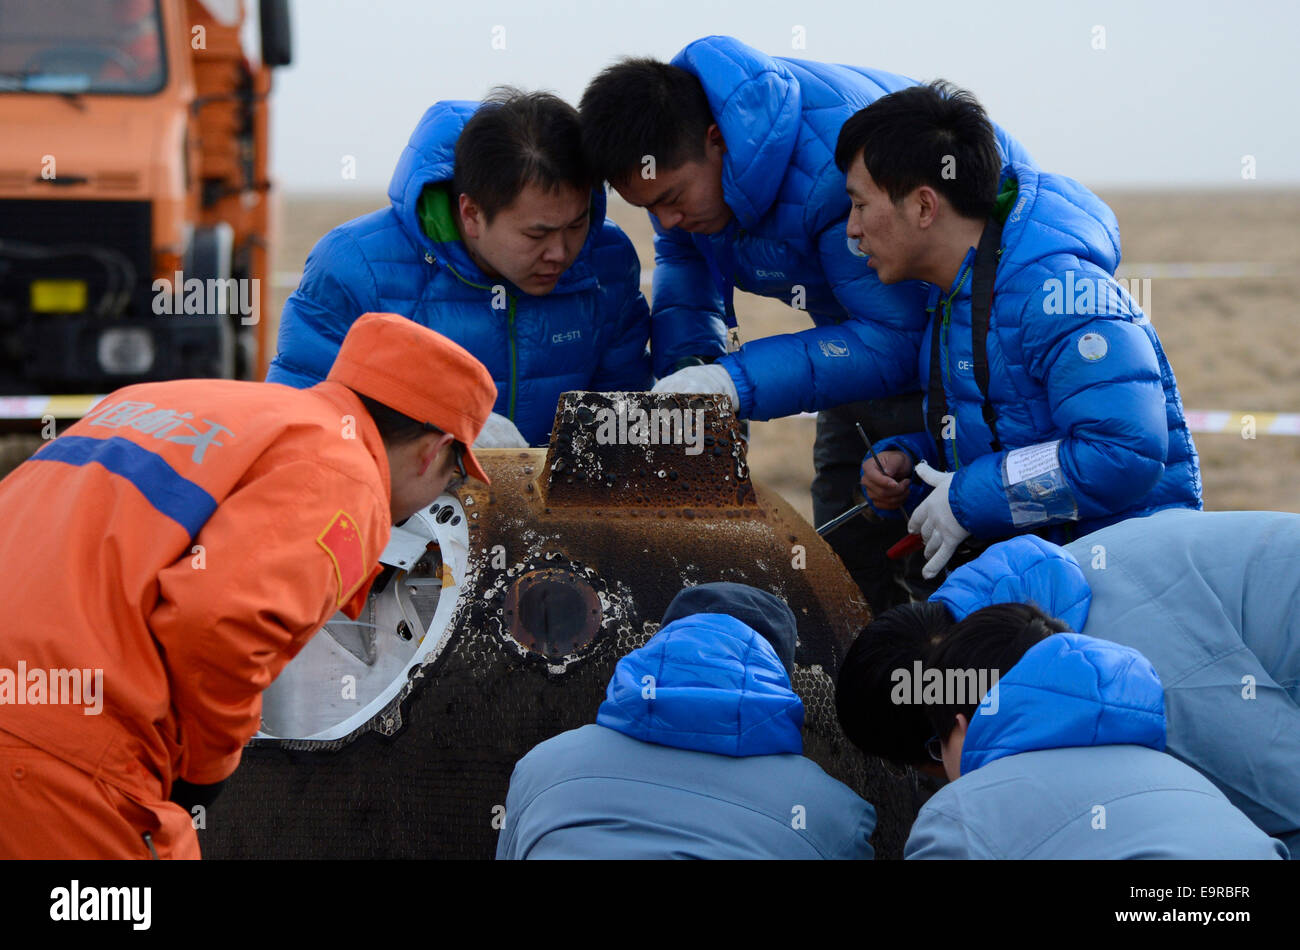 Siziwang Banner. 1st Nov, 2014. Researchers examines the return capsule of China's test lunar orbiter which lands in Siziwang Banner of north China's Inner Mongolia Autonomous Region, Nov. 1, 2014. Launched on Oct. 24, the orbiter traversed 840,000 kilometers on its eight-day mission that saw it round the far side of the Moon and take some incredible pictures of Earth and Moon together. Credit:  Ju Huanzong/Xinhua/Alamy Live News Stock Photo